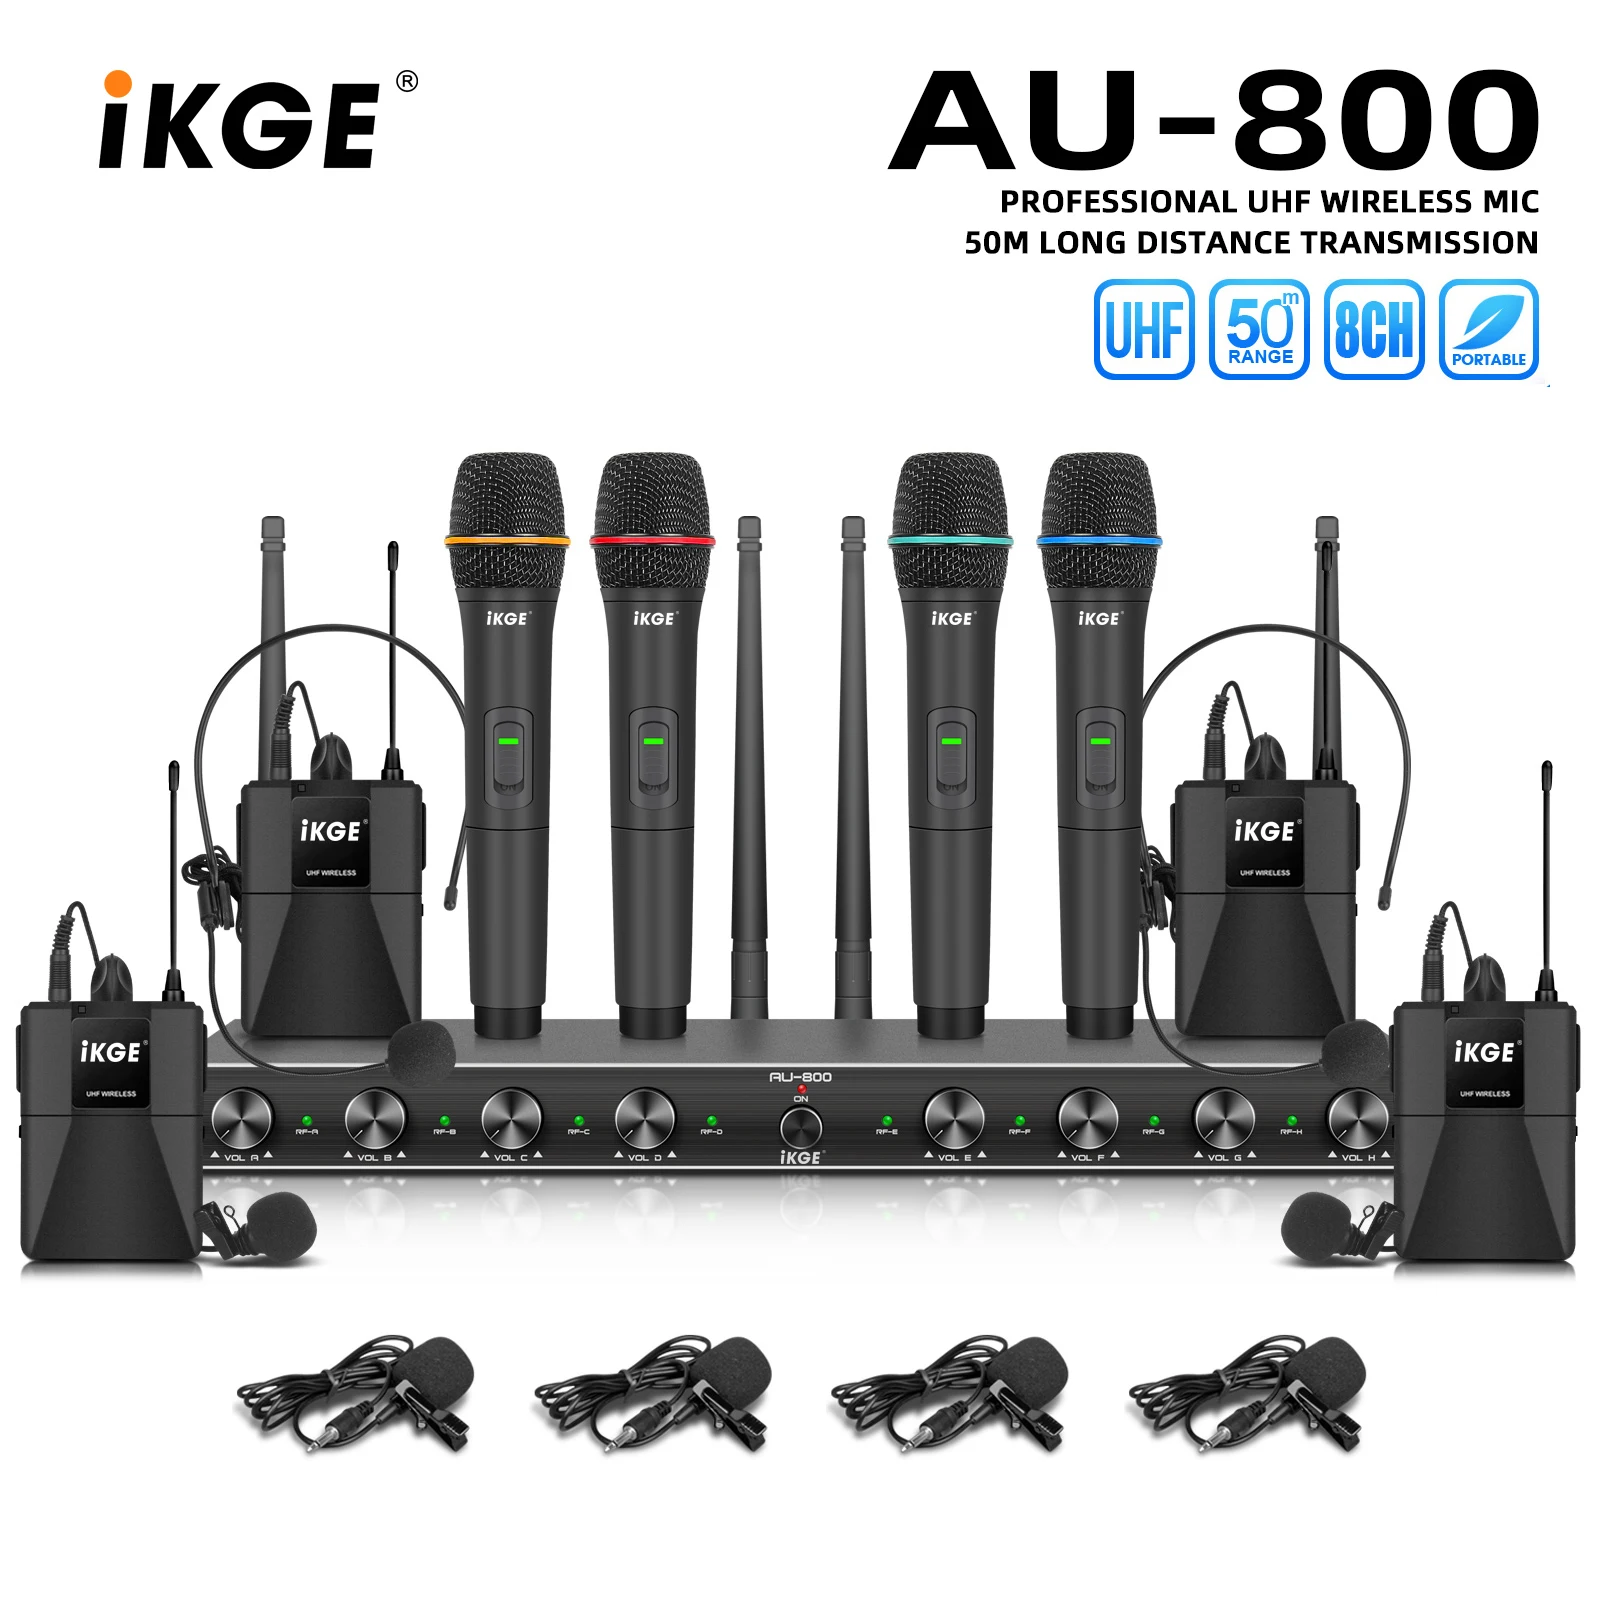 

AU800 UHF Professional Wireless Microphone System for Stage Performance Karaoke, Handheld or Lavalier Microphone and Headset